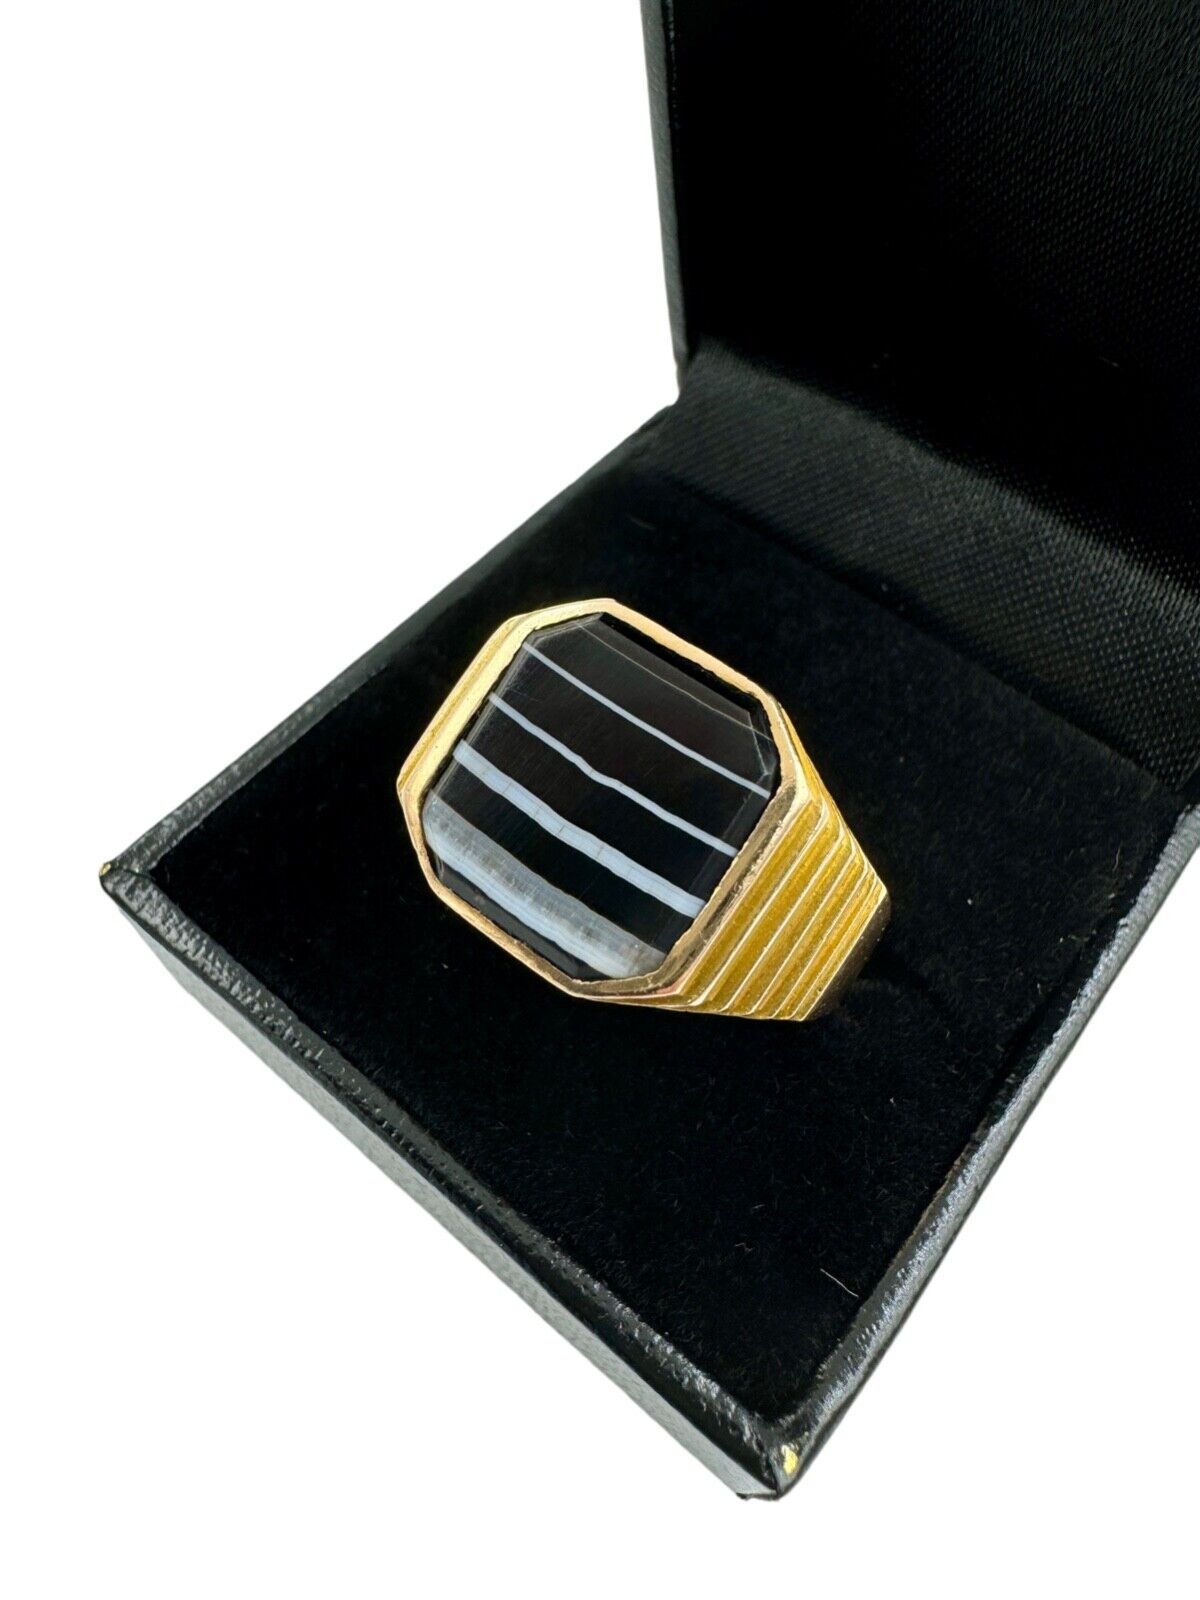 Art Deco 14k Yellow Gold Banded Agate Men's Ring